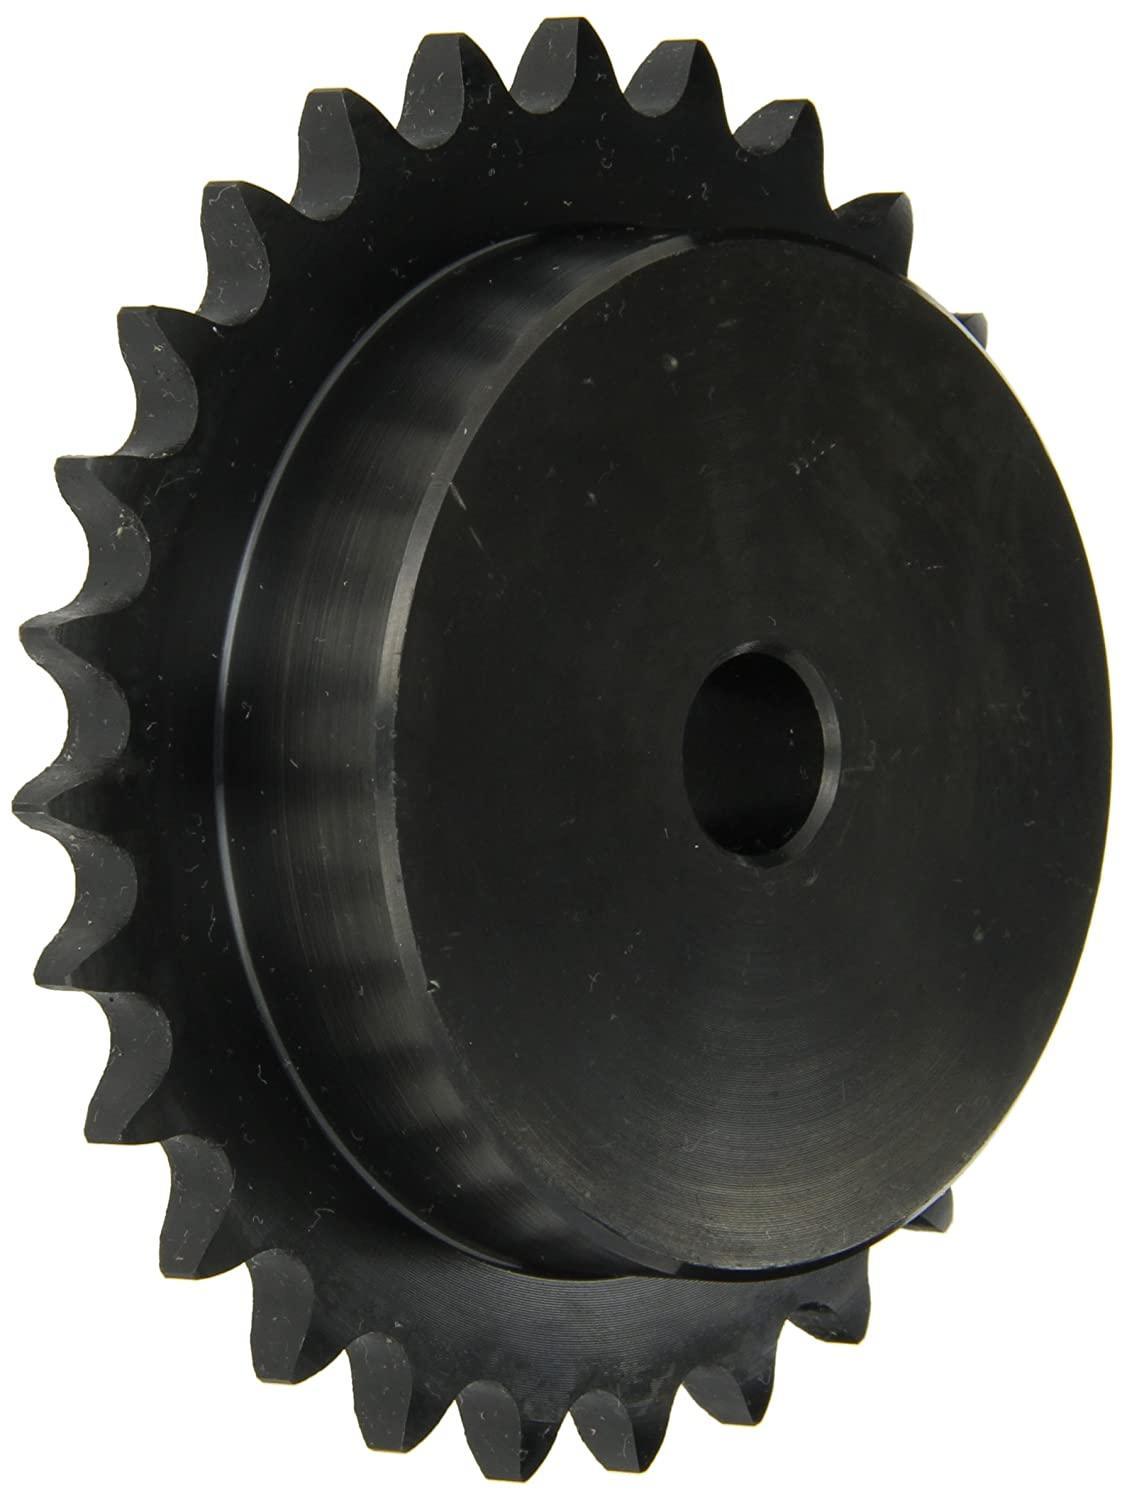 25B28 Roller Chain Sprocket With Stock Bore - Forces Inc